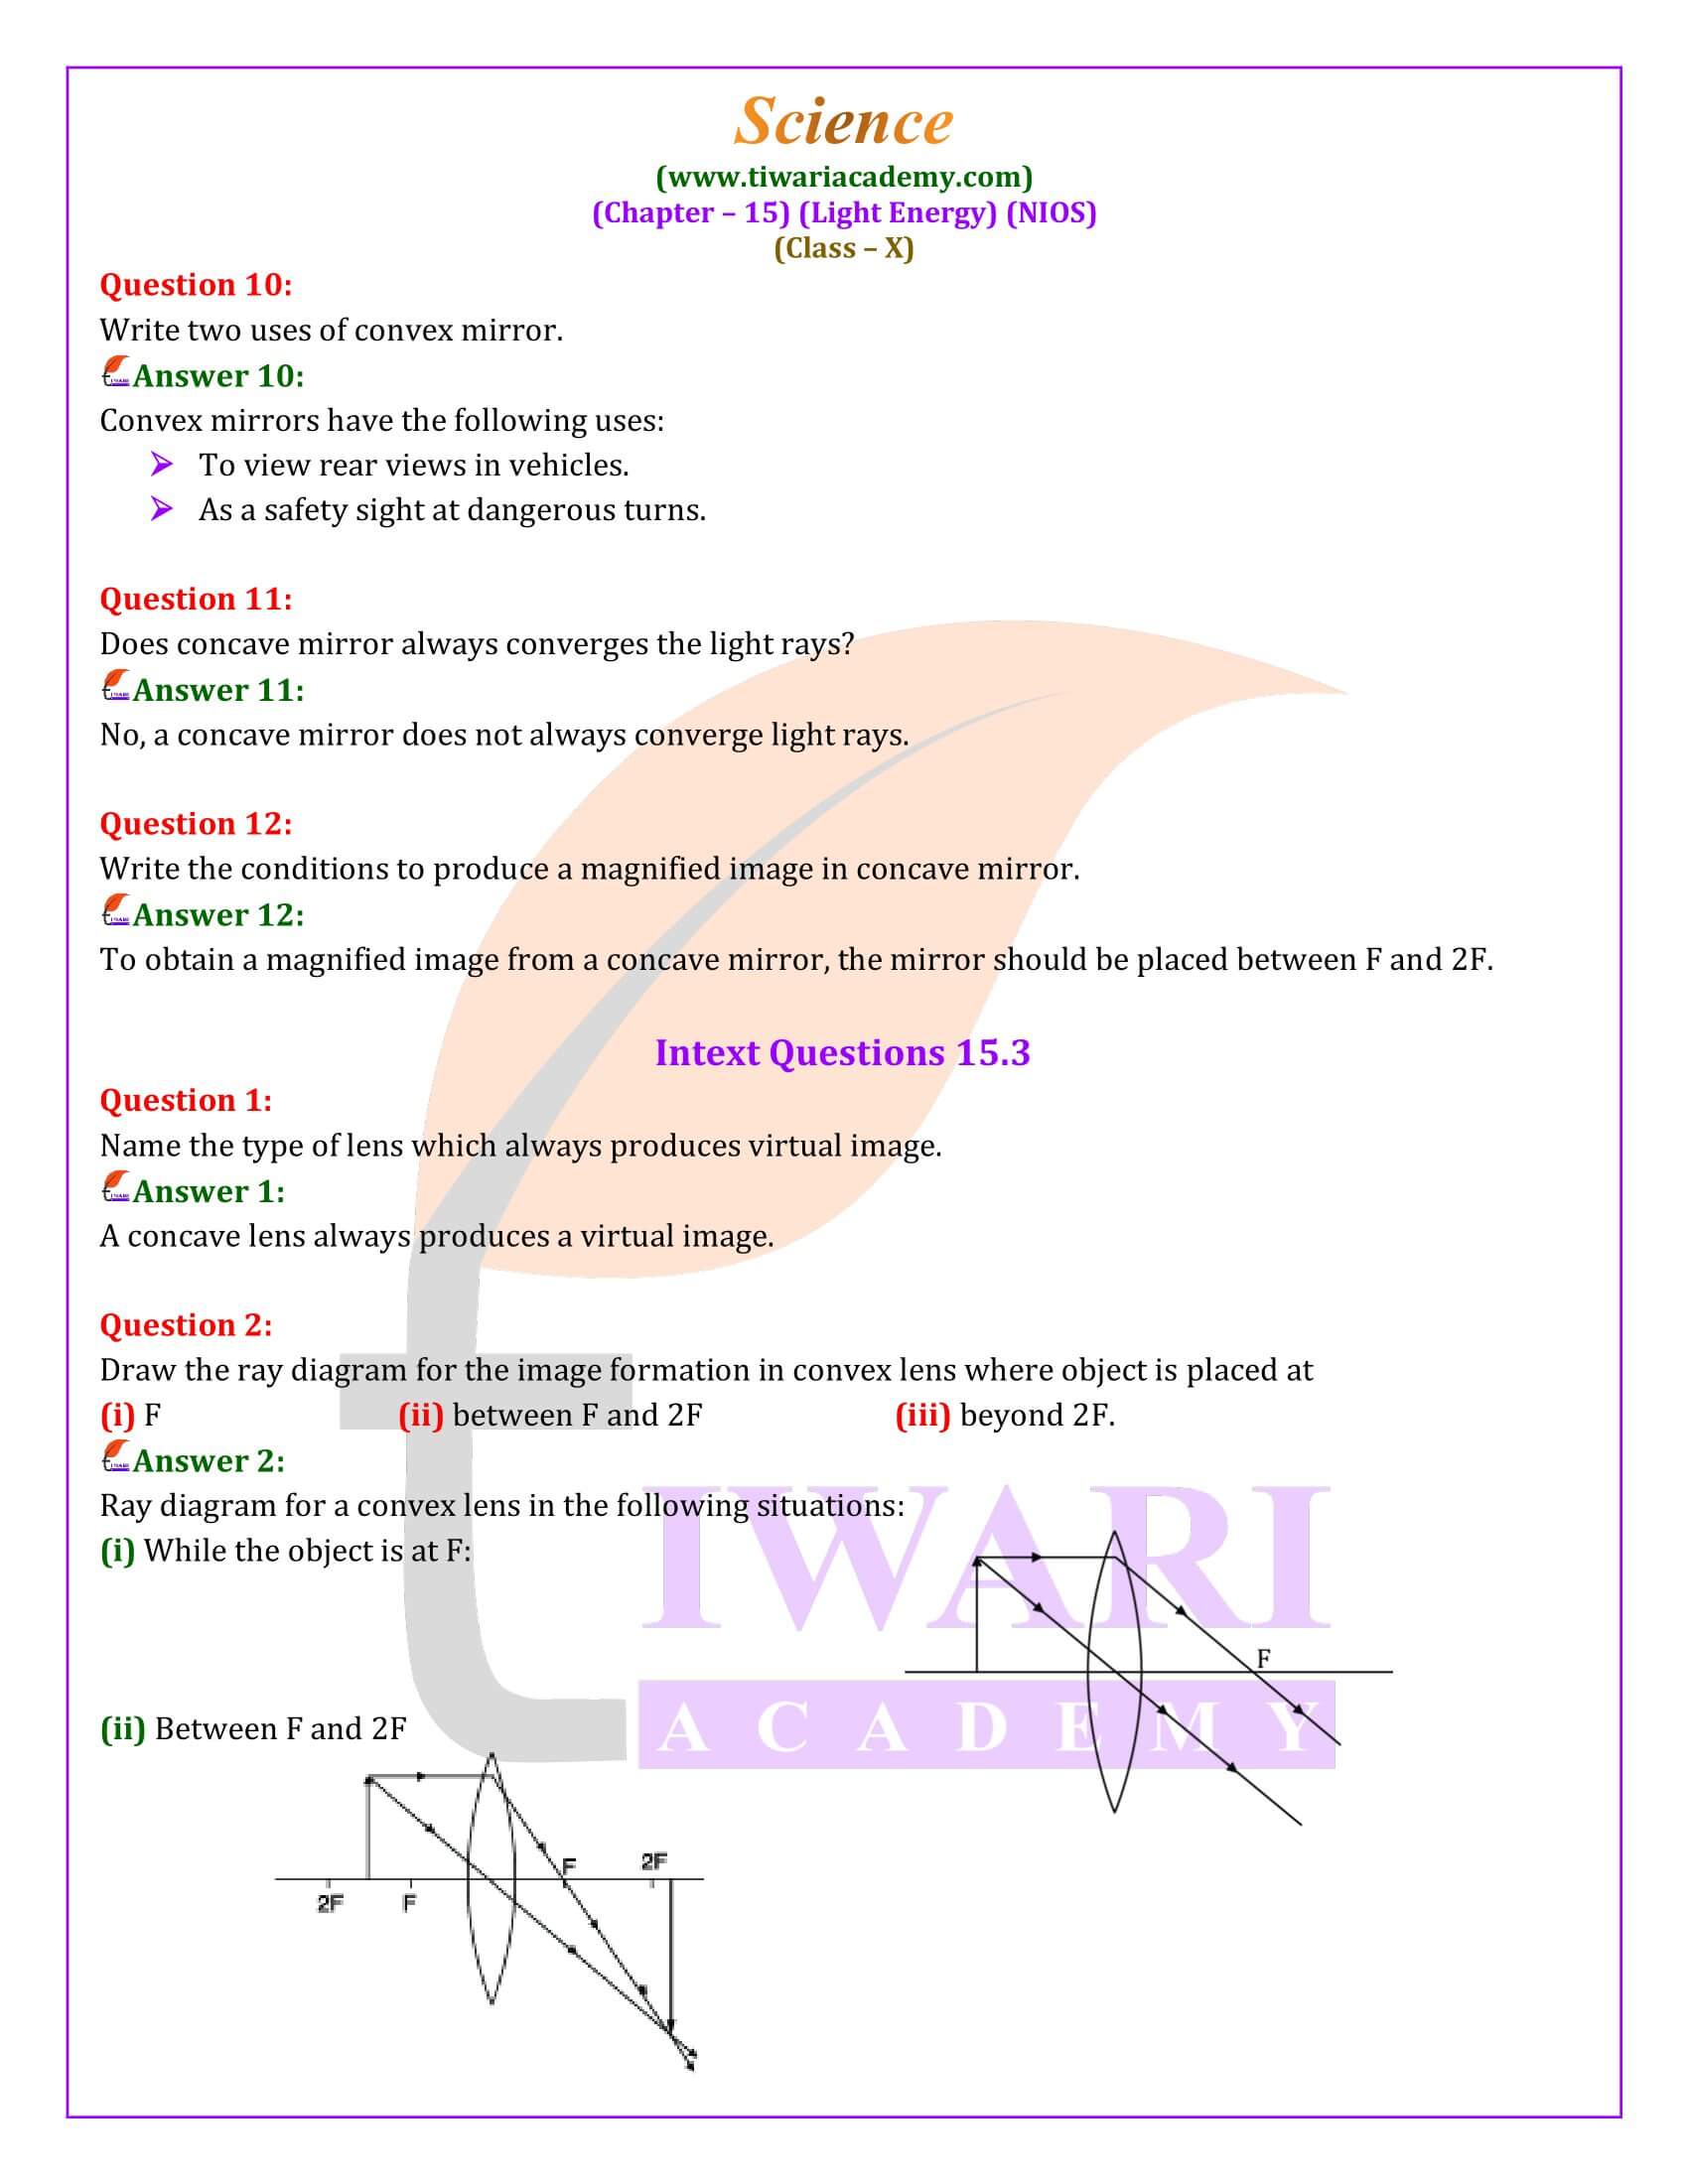 NIOS Class 10 Science Chapter 15 Question Answers